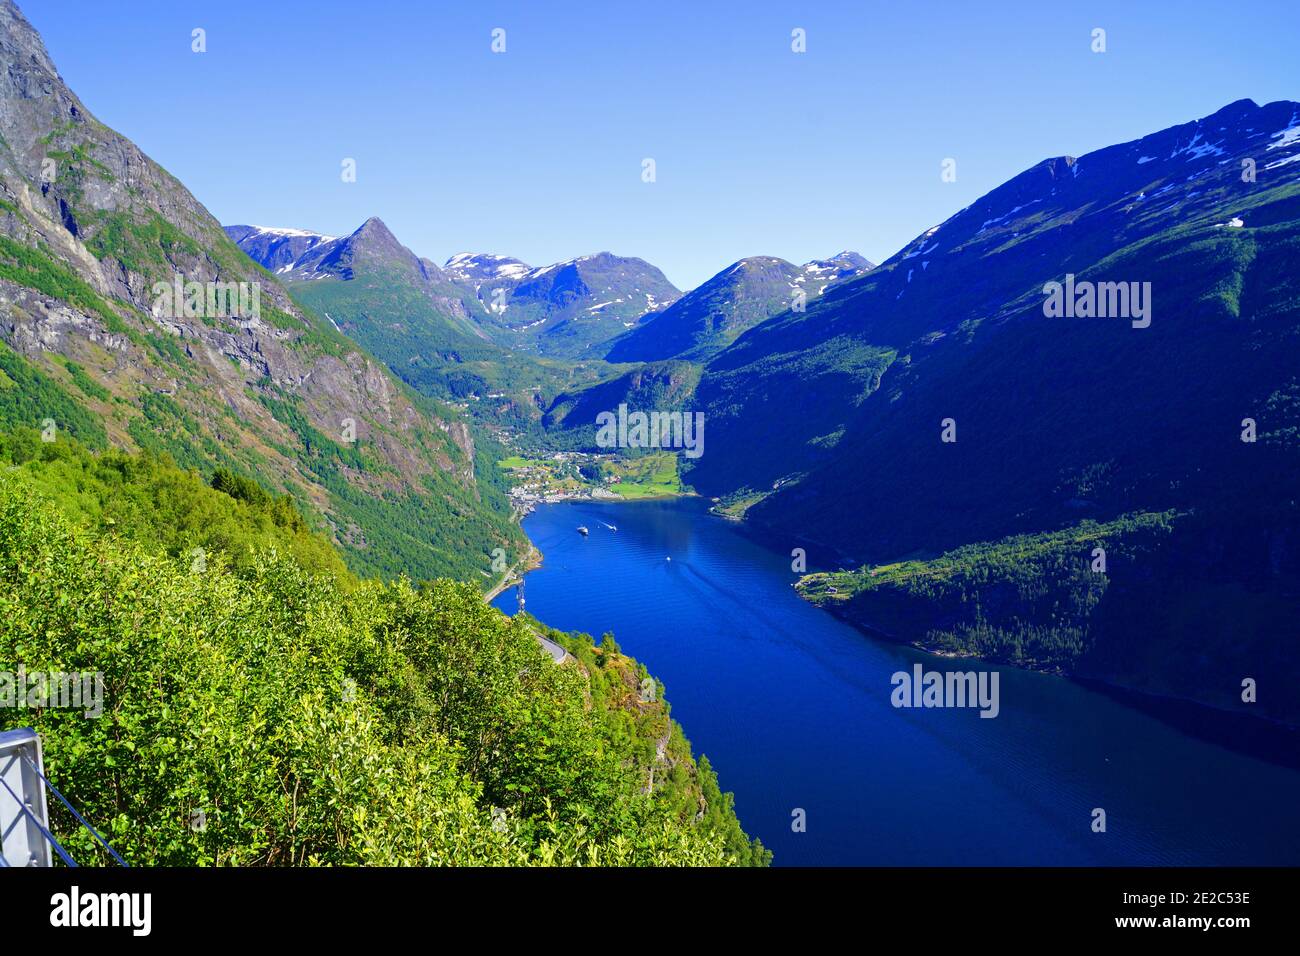 Amazing view over the Geirangerfjord and Geiranger village in Norway. Stock Photo